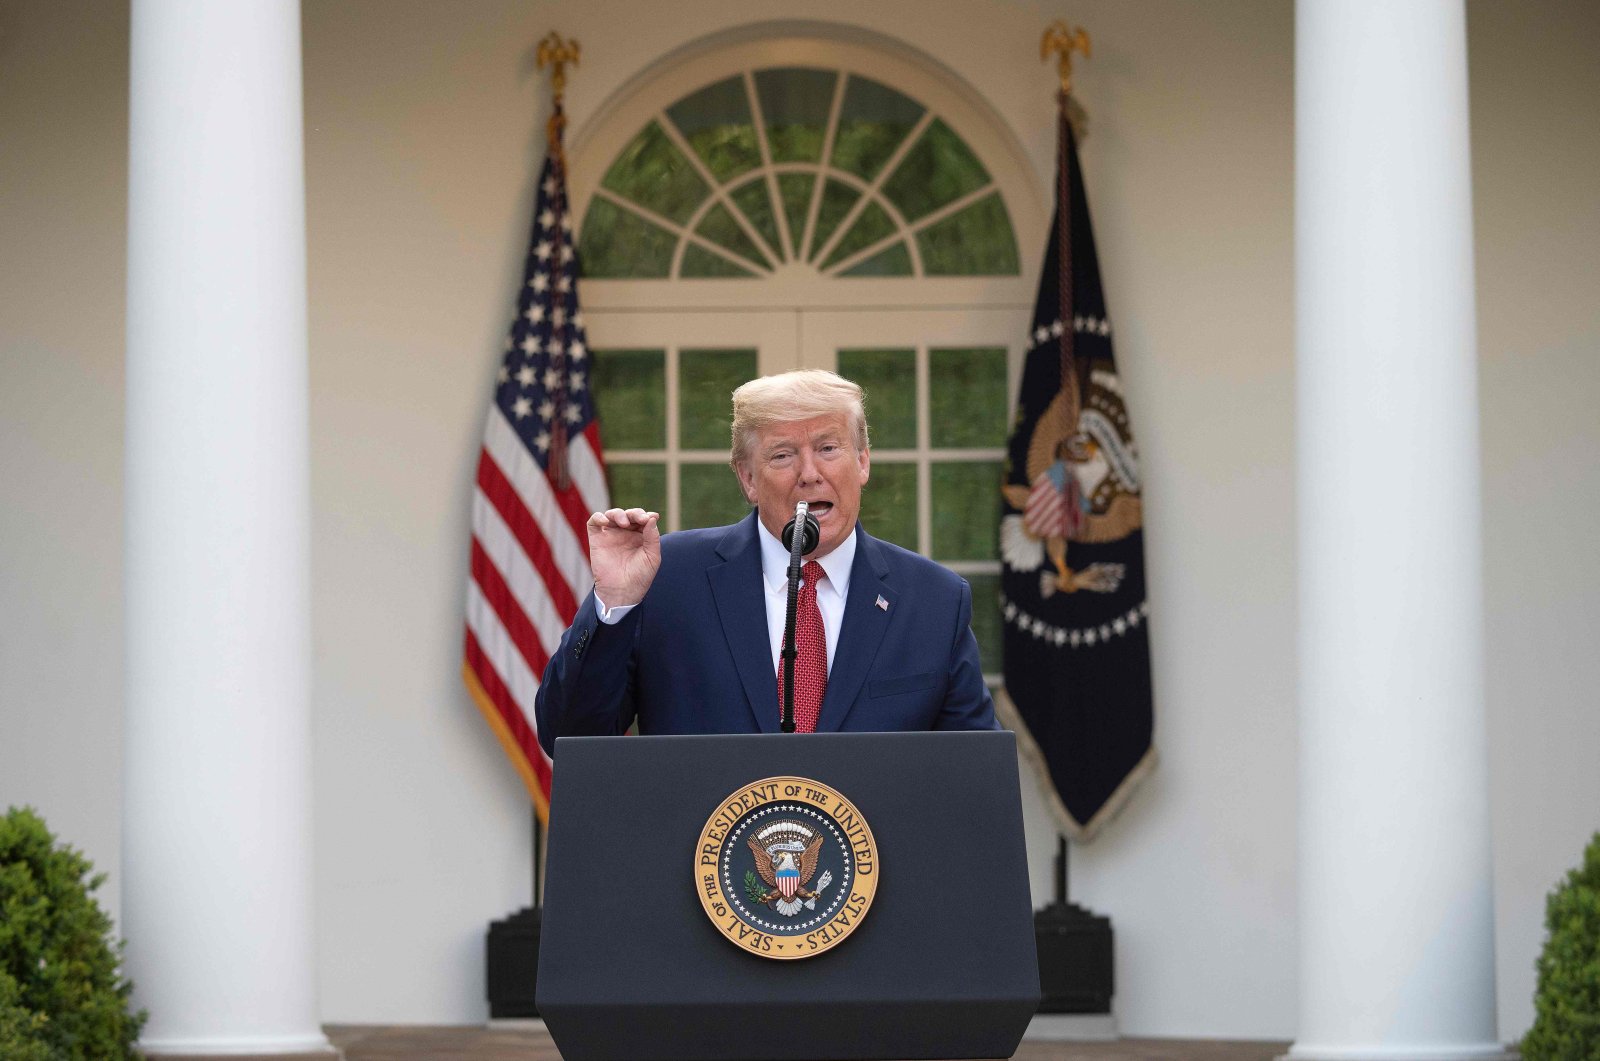 US President Donald Trump speaks during a Coronavirus Task Force press briefing in the Rose Garden of the White House in Washington, DC, on March 29, 2020. (AFP Photo)